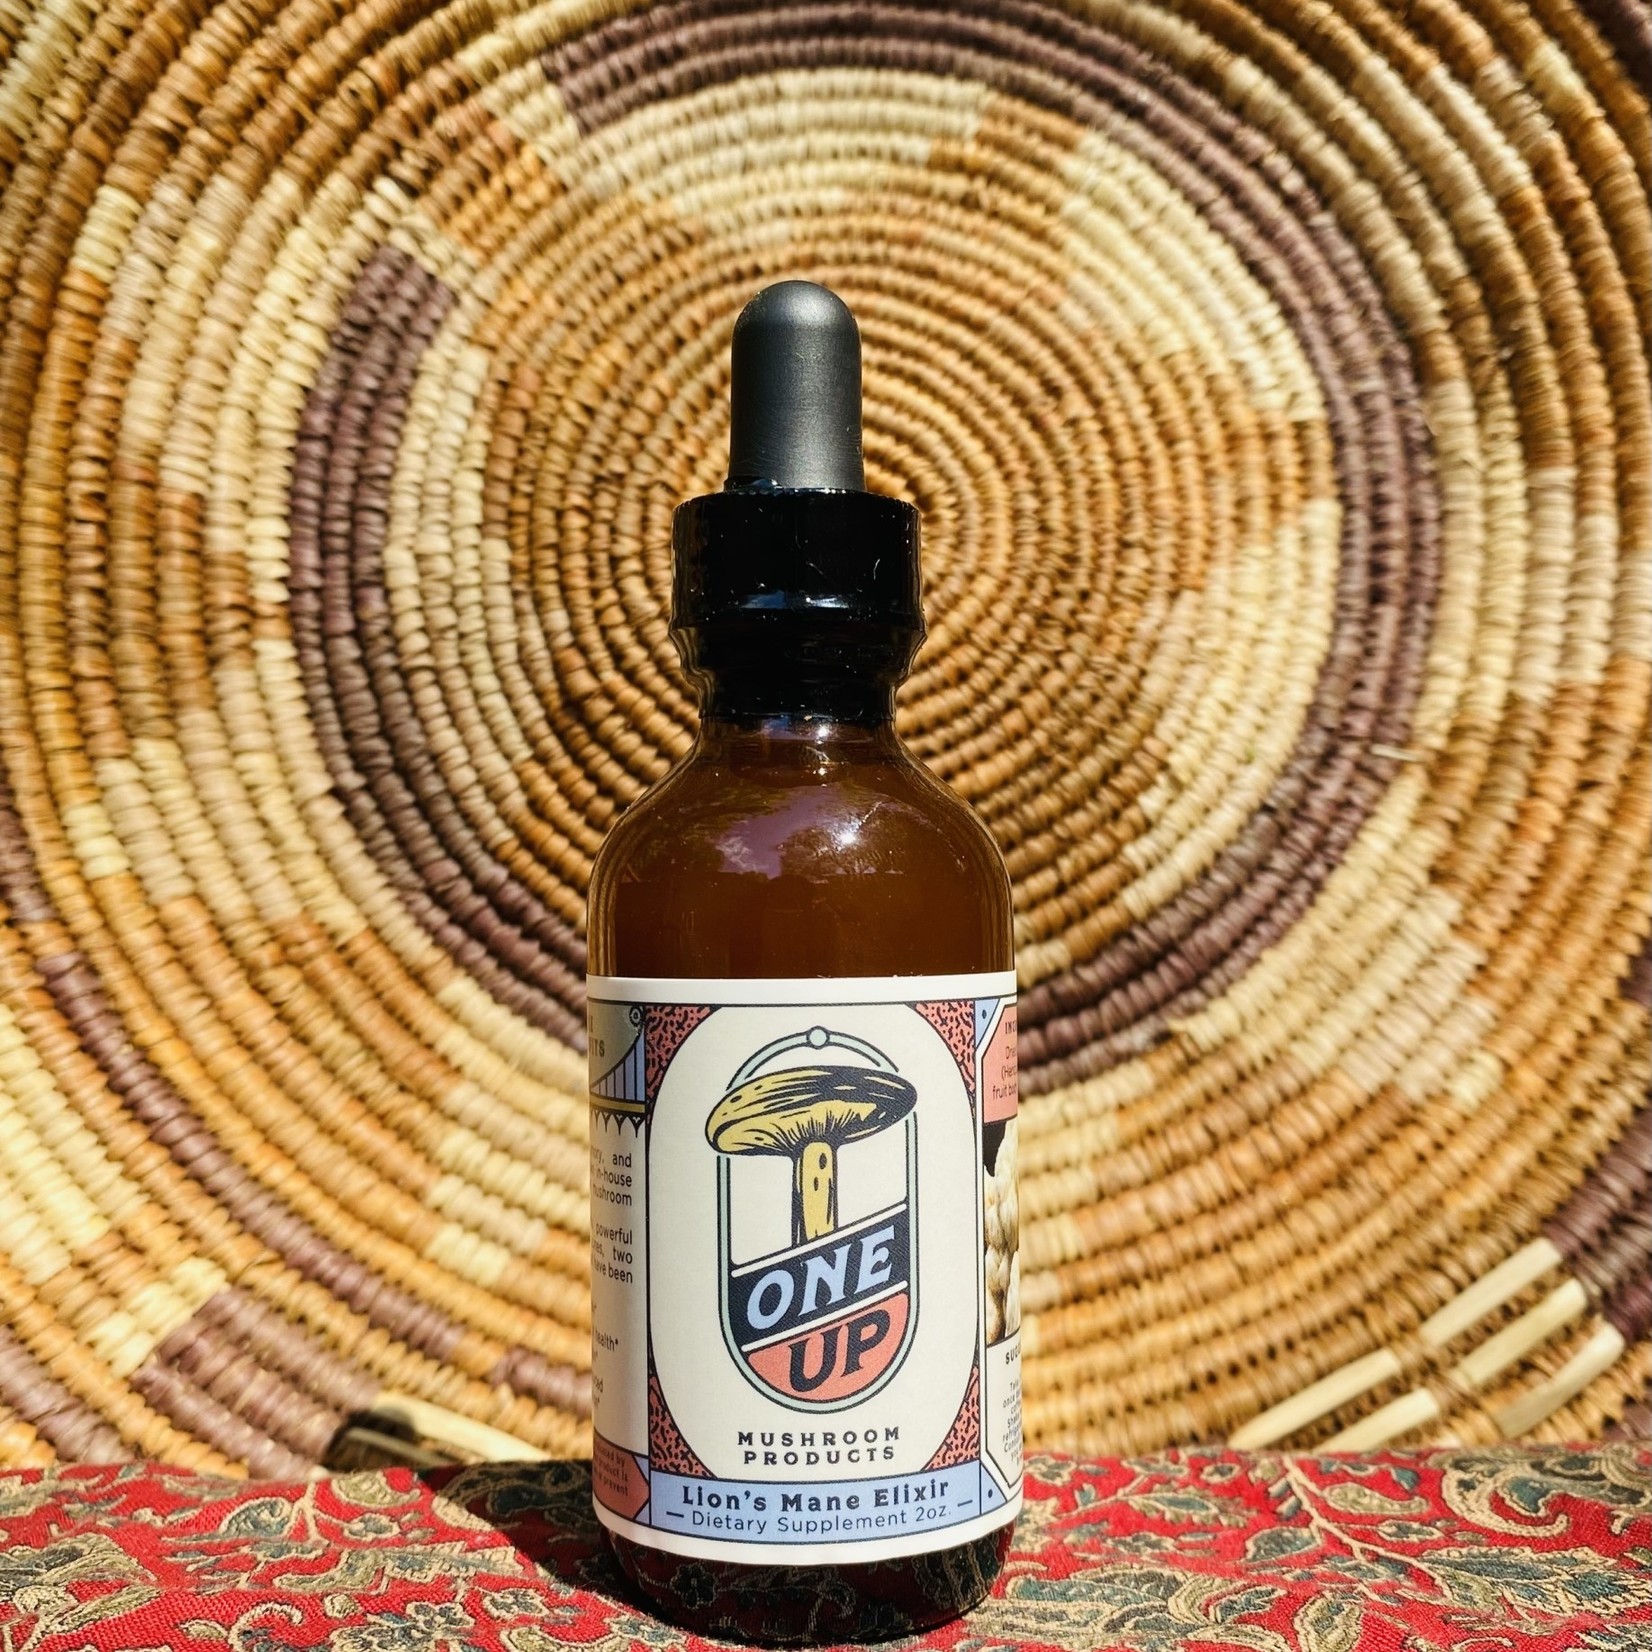 One Up Mushroom Products Lions Mane Elixir by One Up Mushroom Products